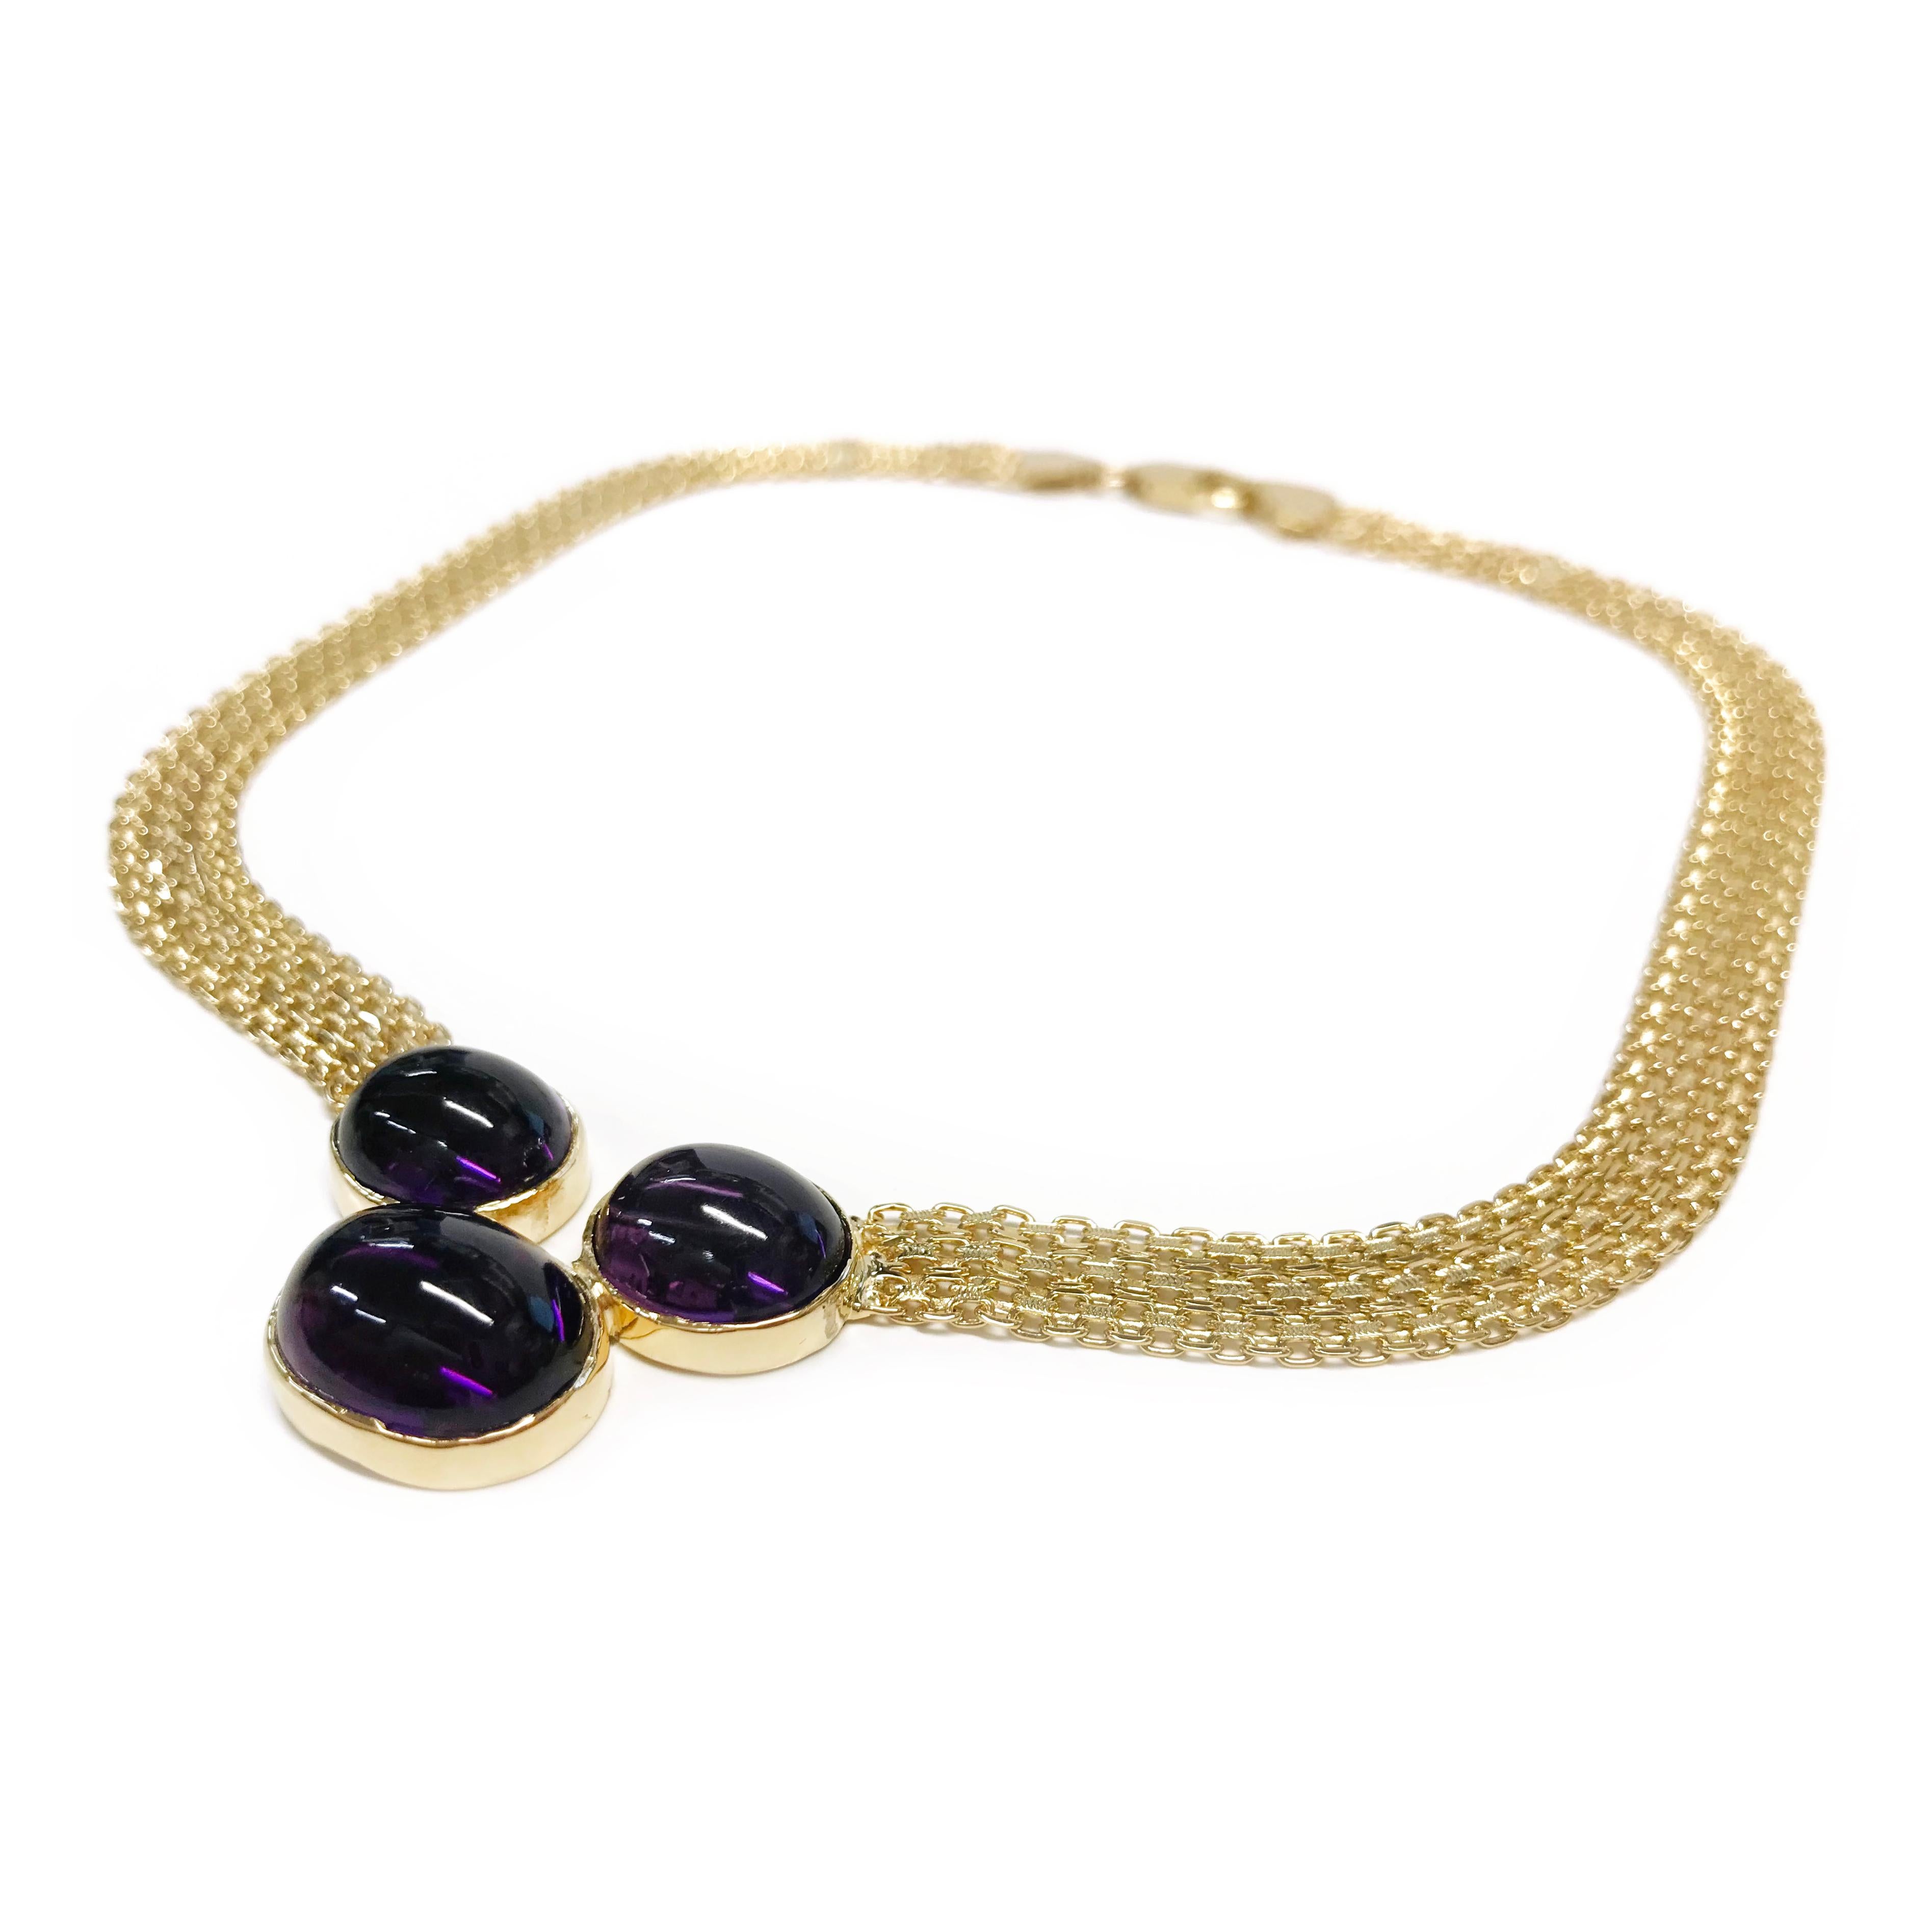 18 Karat Bismark Amethyst Necklace. The flat 9.3mm necklace features three oval bezel-set Amethyst cabochons. The cabochons measure 17.2 x 13.9 x 18.2mm, 14.3 x 13.2 x 18mm, and 14.7 x 13.1 x 17.5mm. Stamped on the clasp of the chain is 62 AR 750,